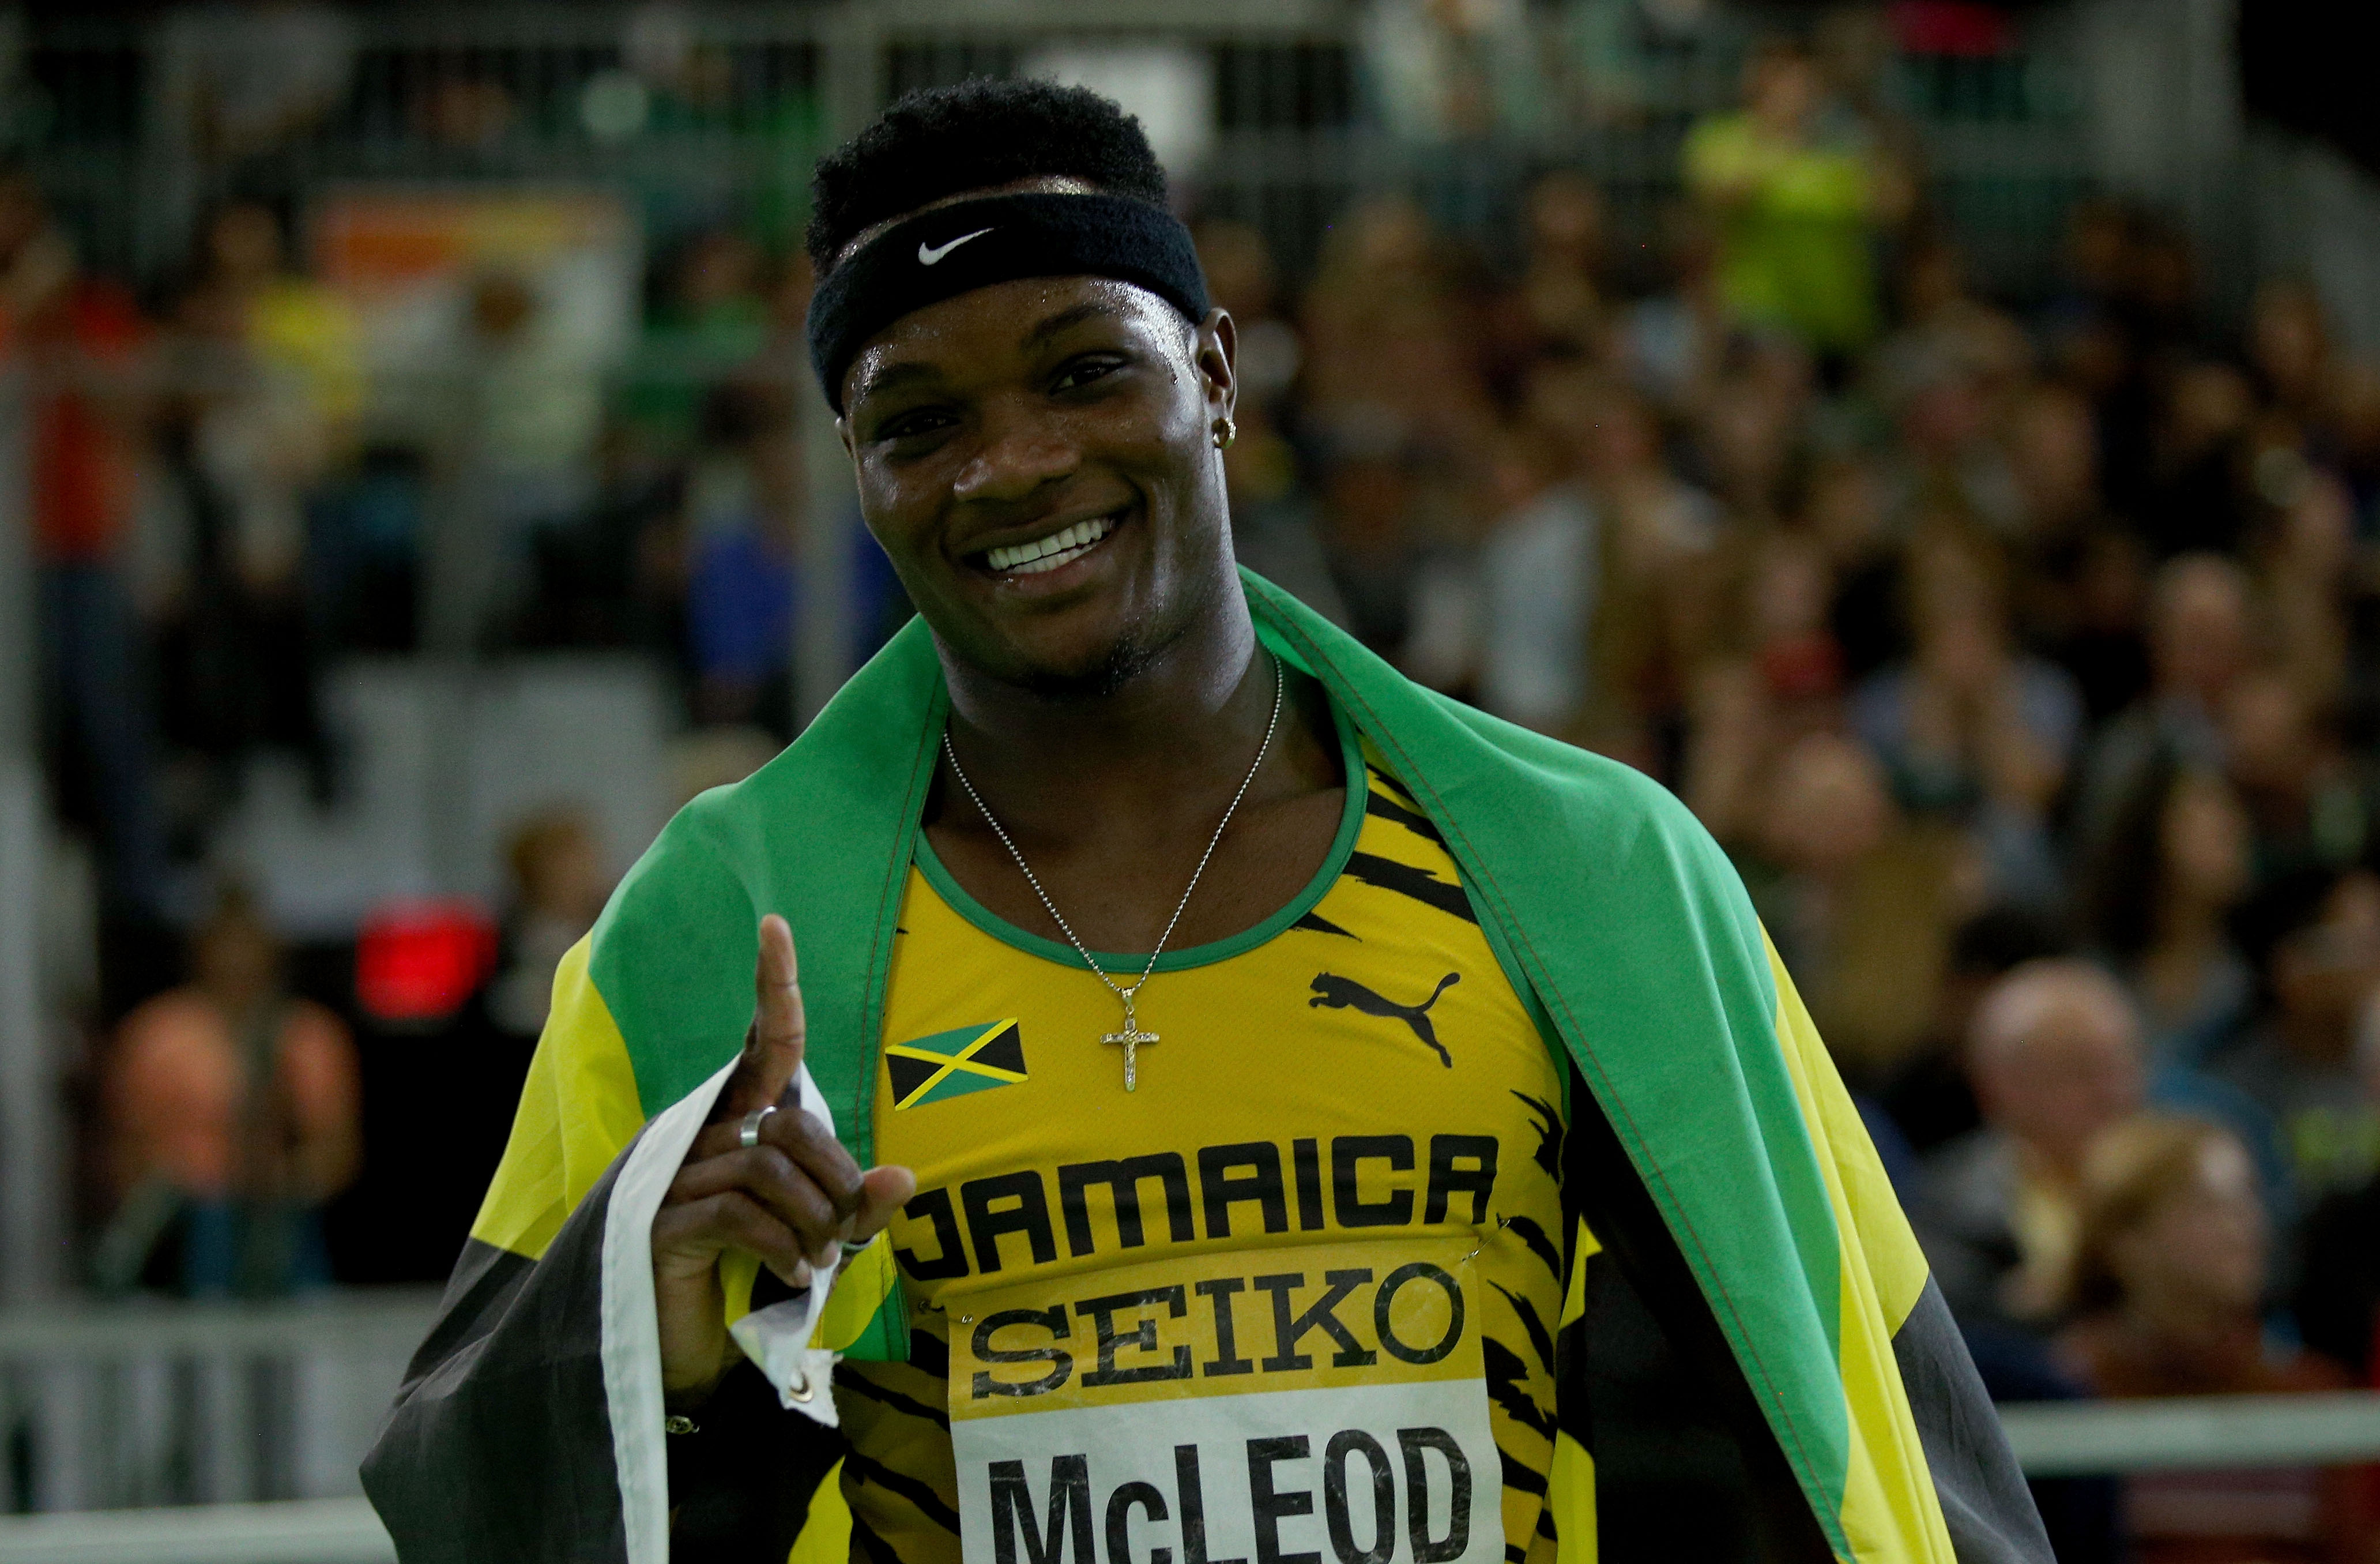 Jamaicans McLeod, Anderson, Whyte secure wins at Track Meet